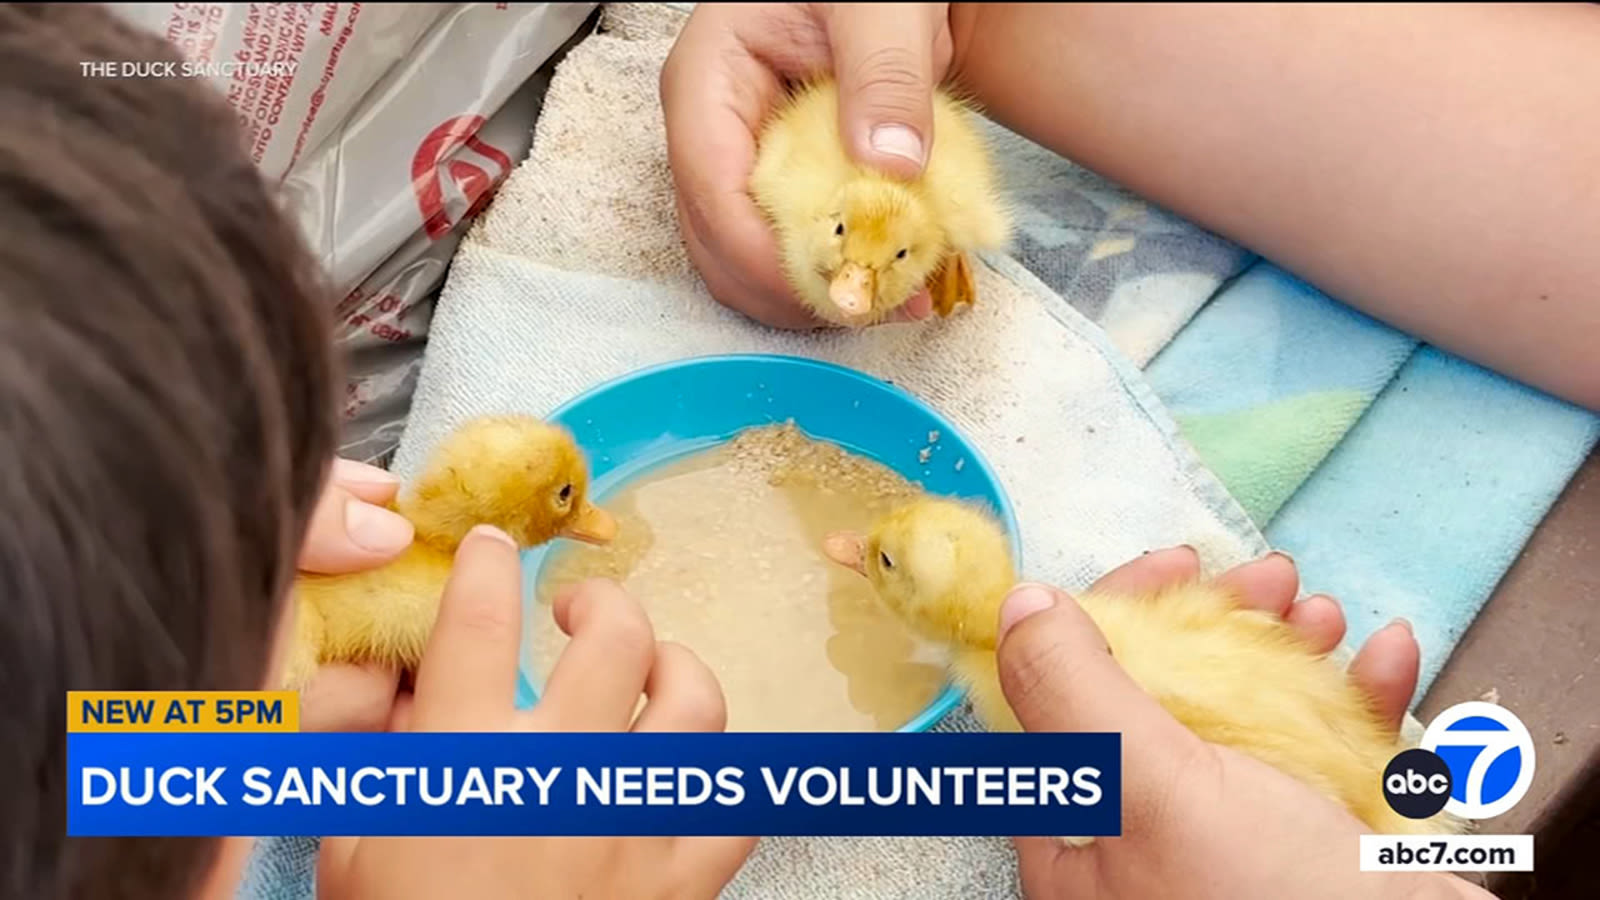 Dozens of duck eggs hatch before cooking, leaving IE sanctuary with influx of ducklings